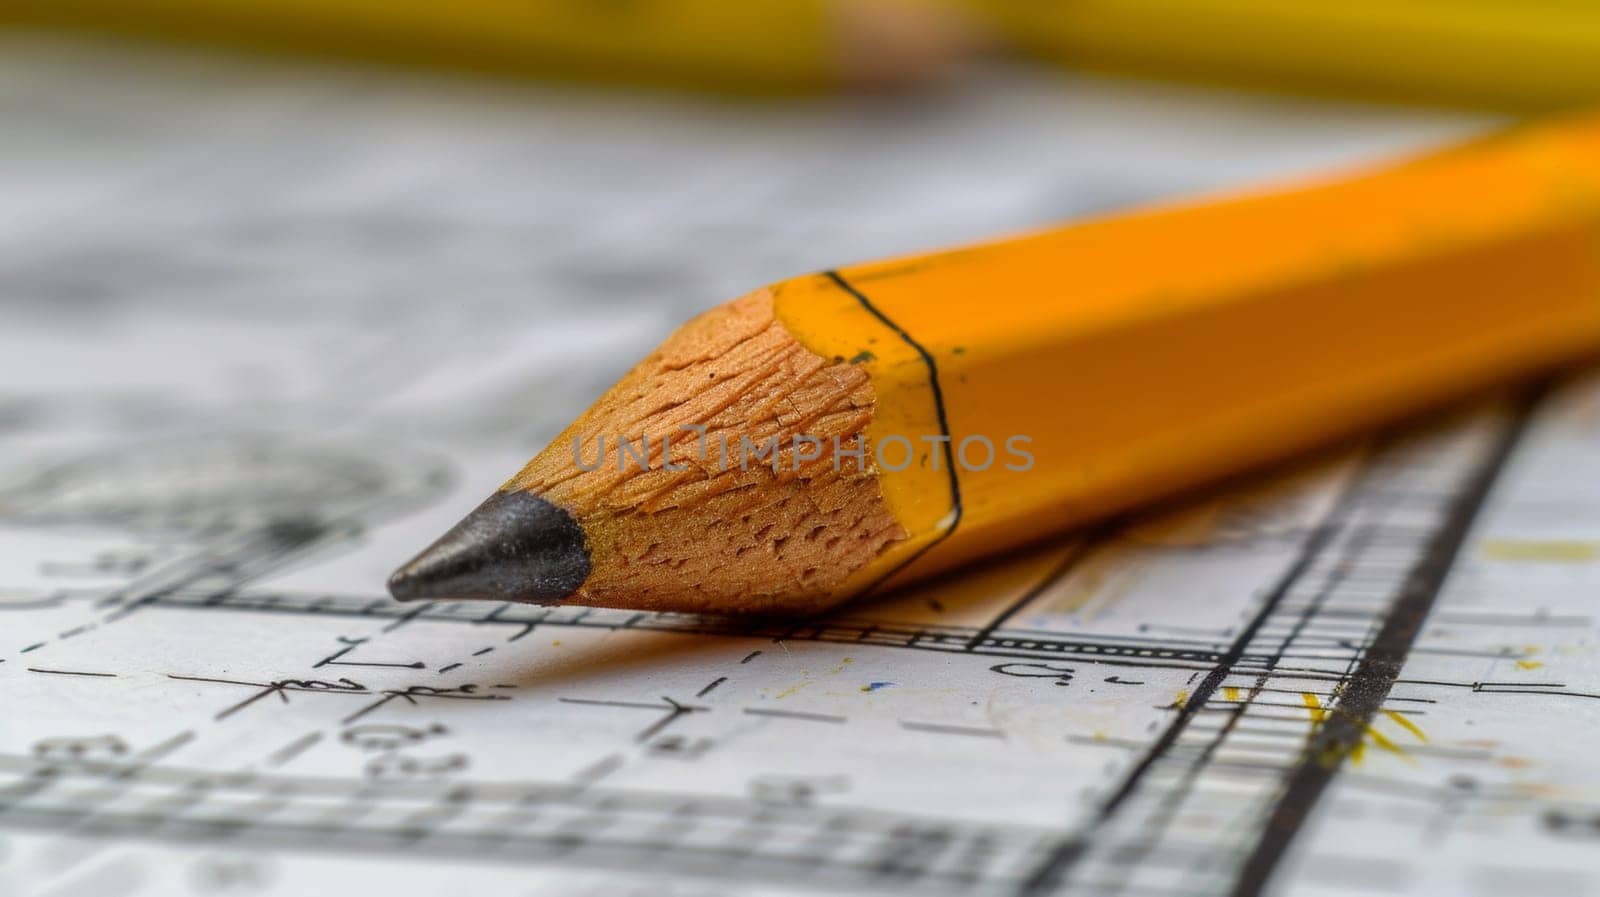 A close up of a pencil laying on top of some blueprints, AI by starush